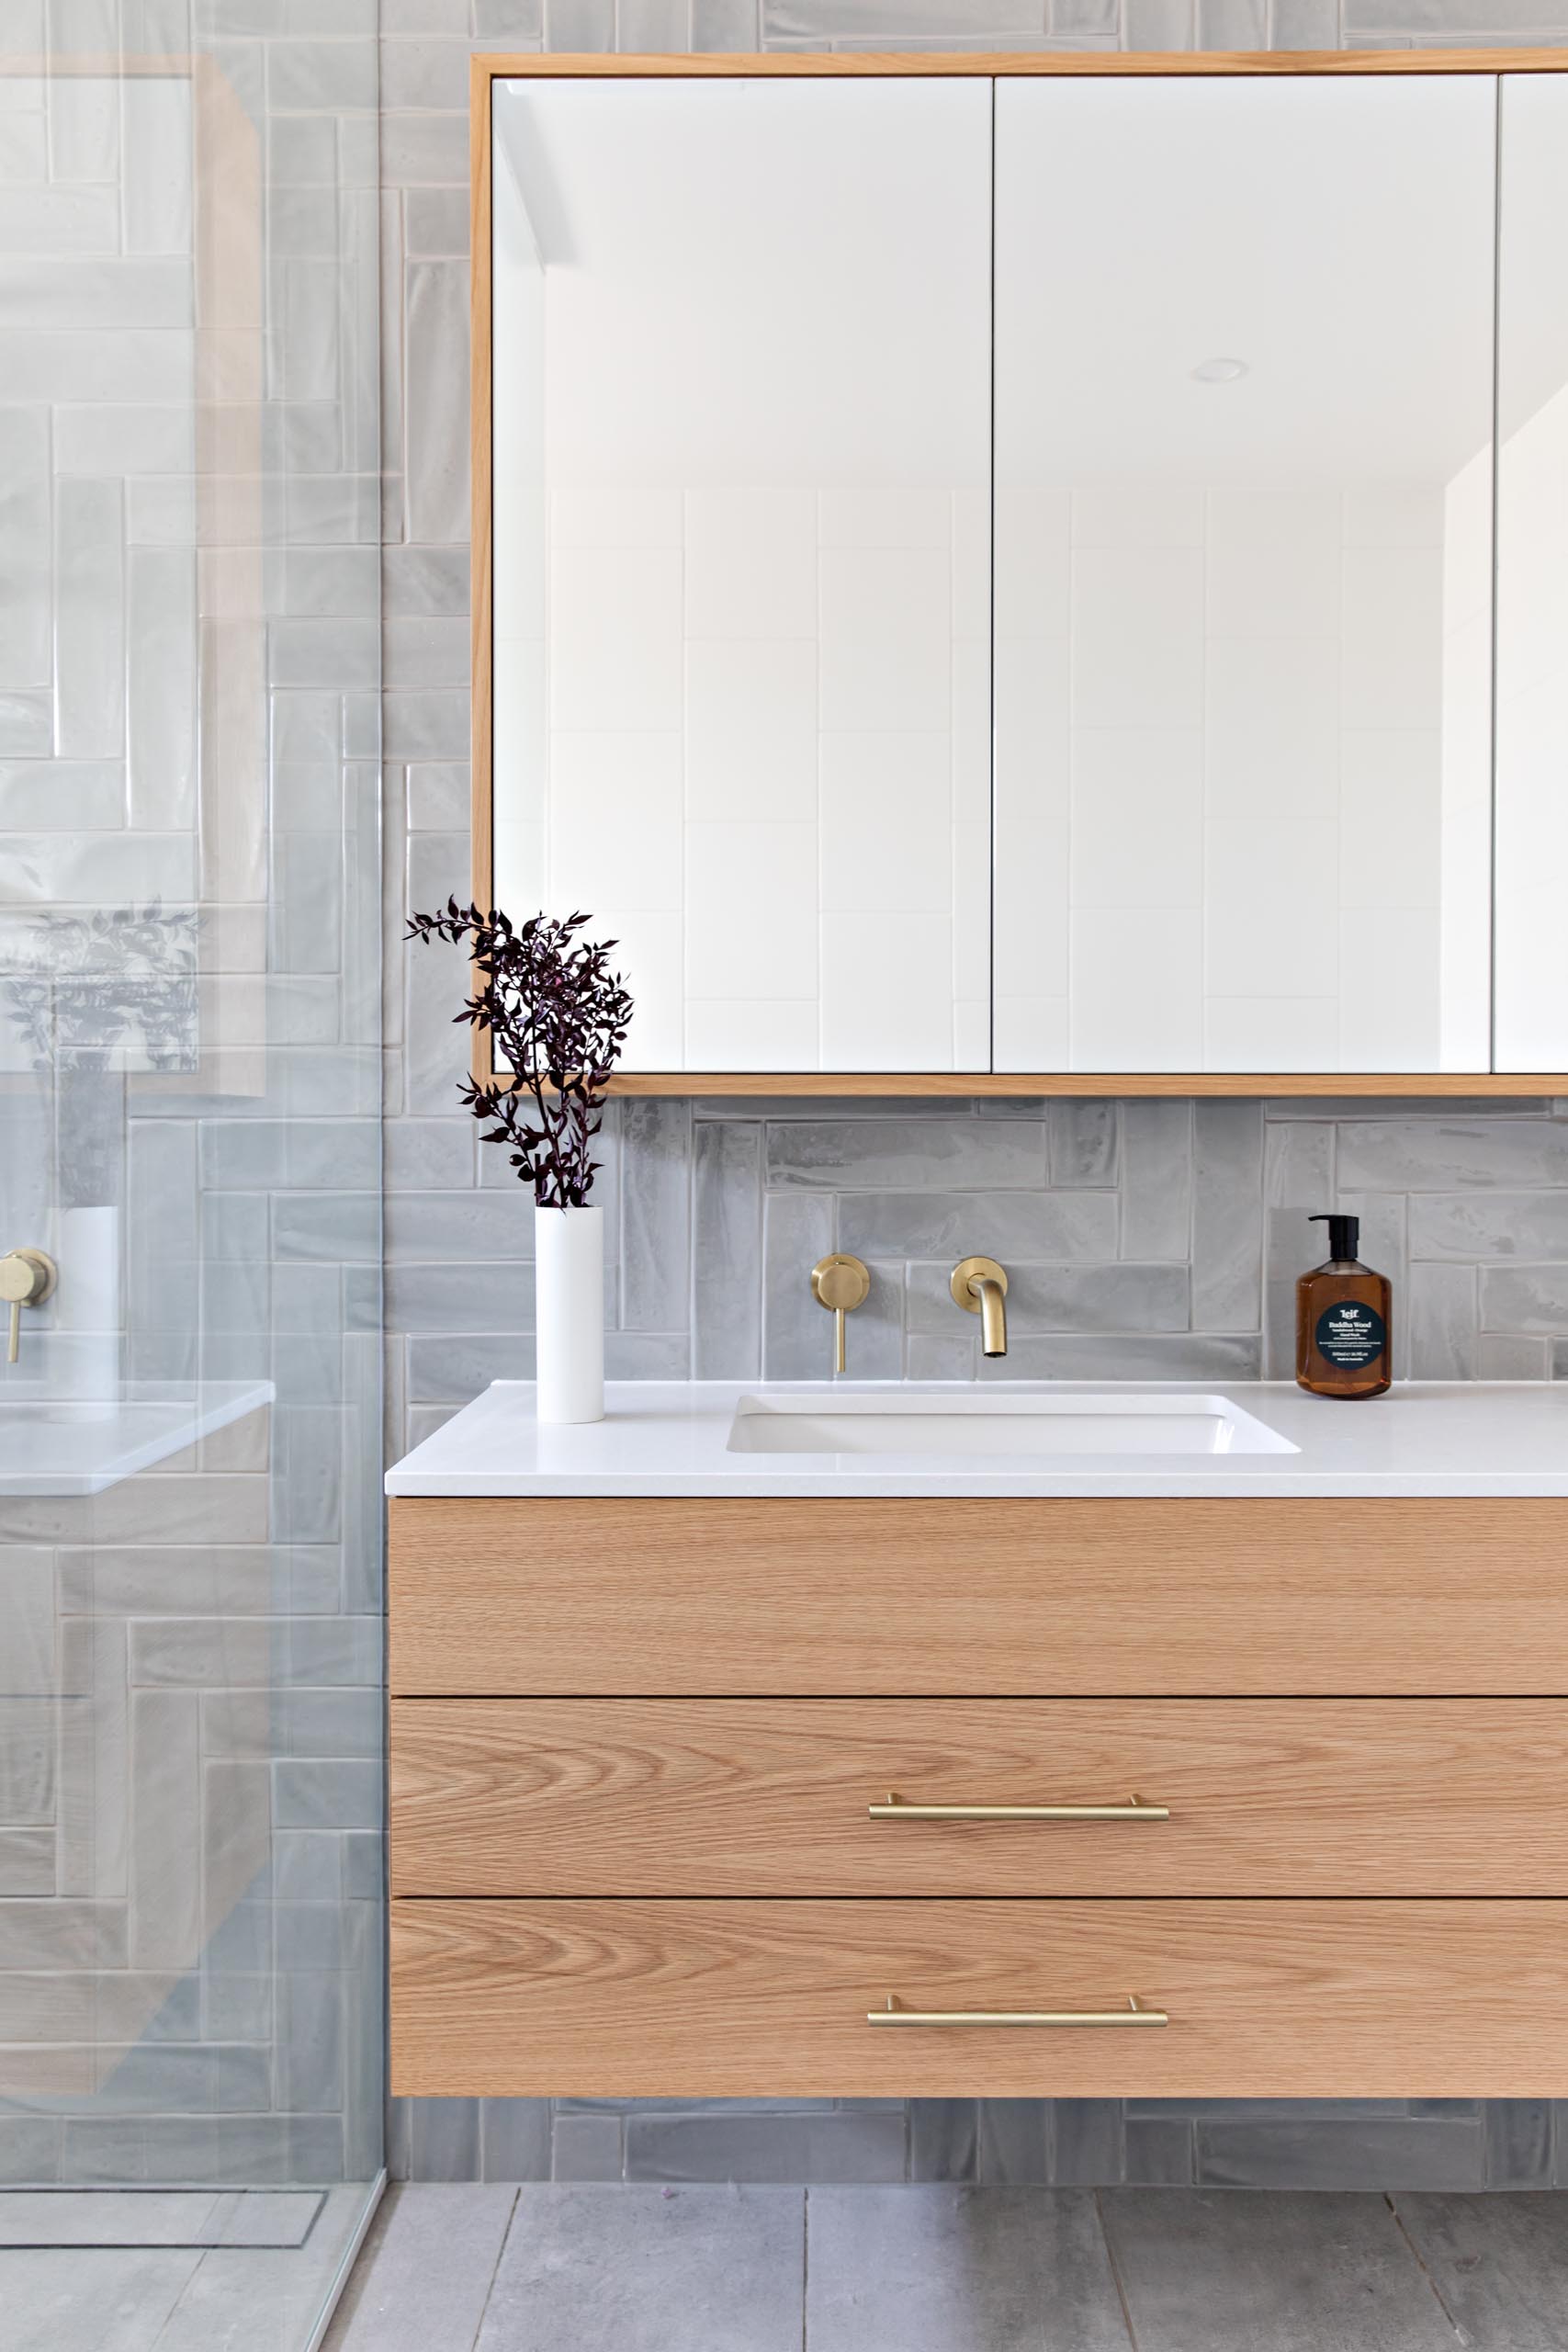 A modern bathroom with grey tiles installed in a herringbone pattern cover the wall, a floating wood vanity with a white countertop, and a glass shower screen that separates the shower and freestanding bathtub from the rest of the room.